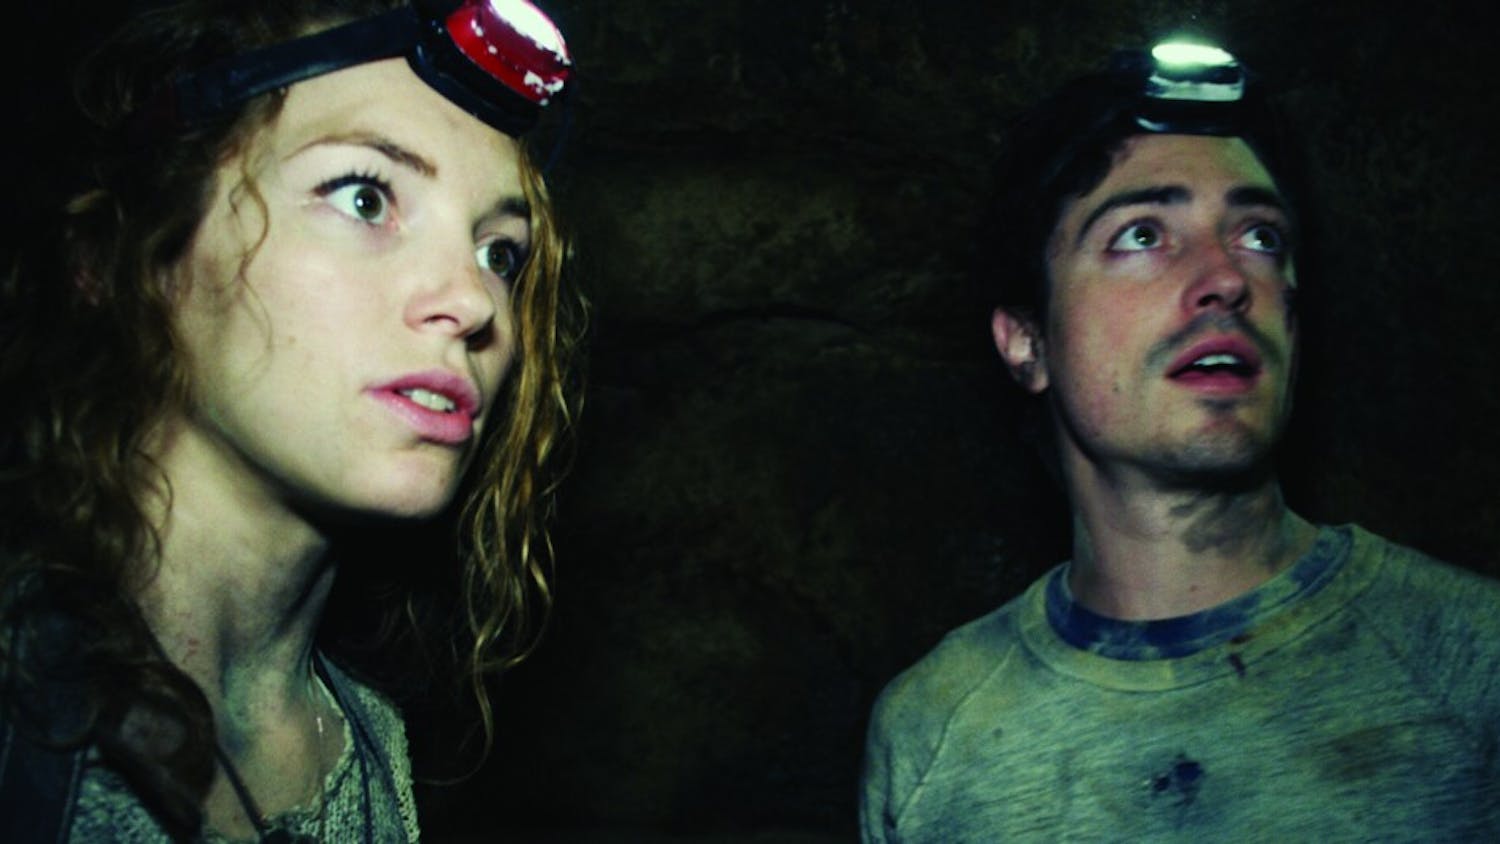 Scarlett (PERDITA WEEKS) and George (BEN FELDMAN) traverse miles of twisting catacombs beneath the streets of Paris in "As Above/So Below".  A journey into madness and terror, "As Above/So Below" reaches deep into the human psyche to reveal the personal demons that come back to haunt us all.  